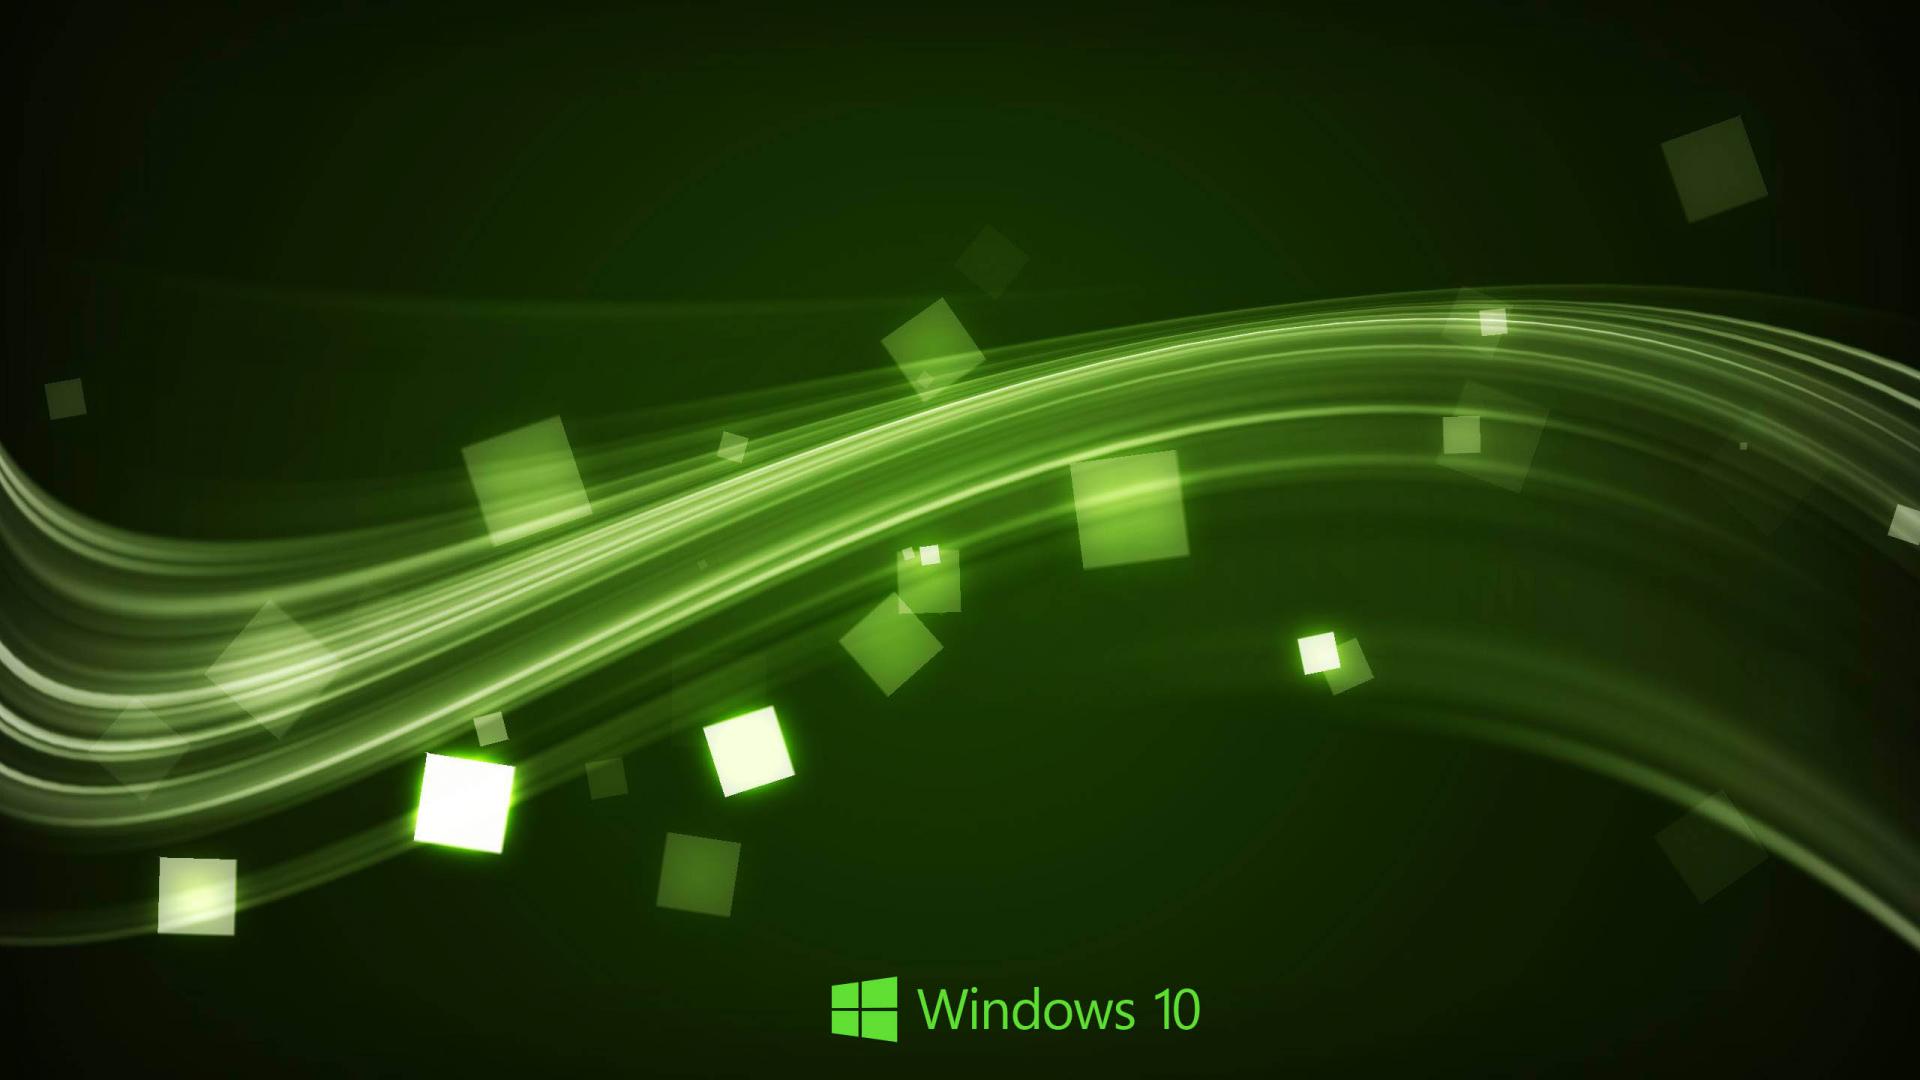 Windows 10 Wallpaper in Abstract Green Waves HD Wallpapers for 1920x1080